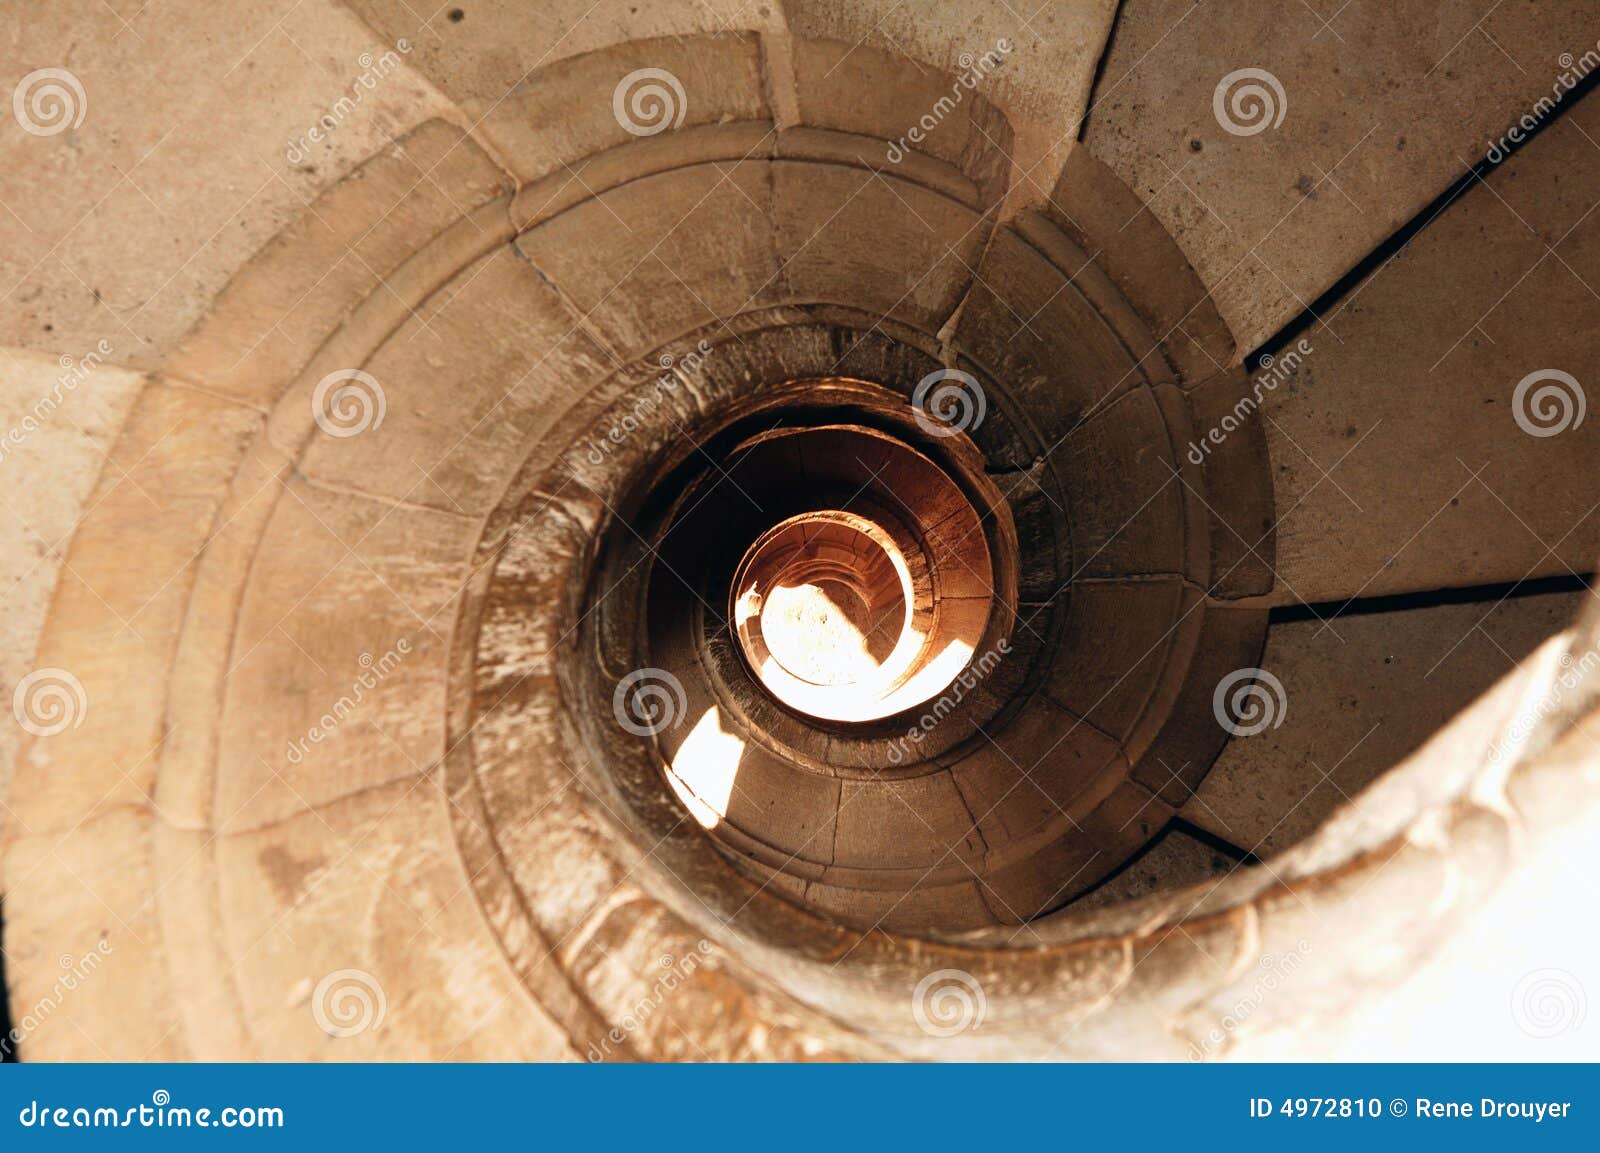 portugal, tomar: helical stairs